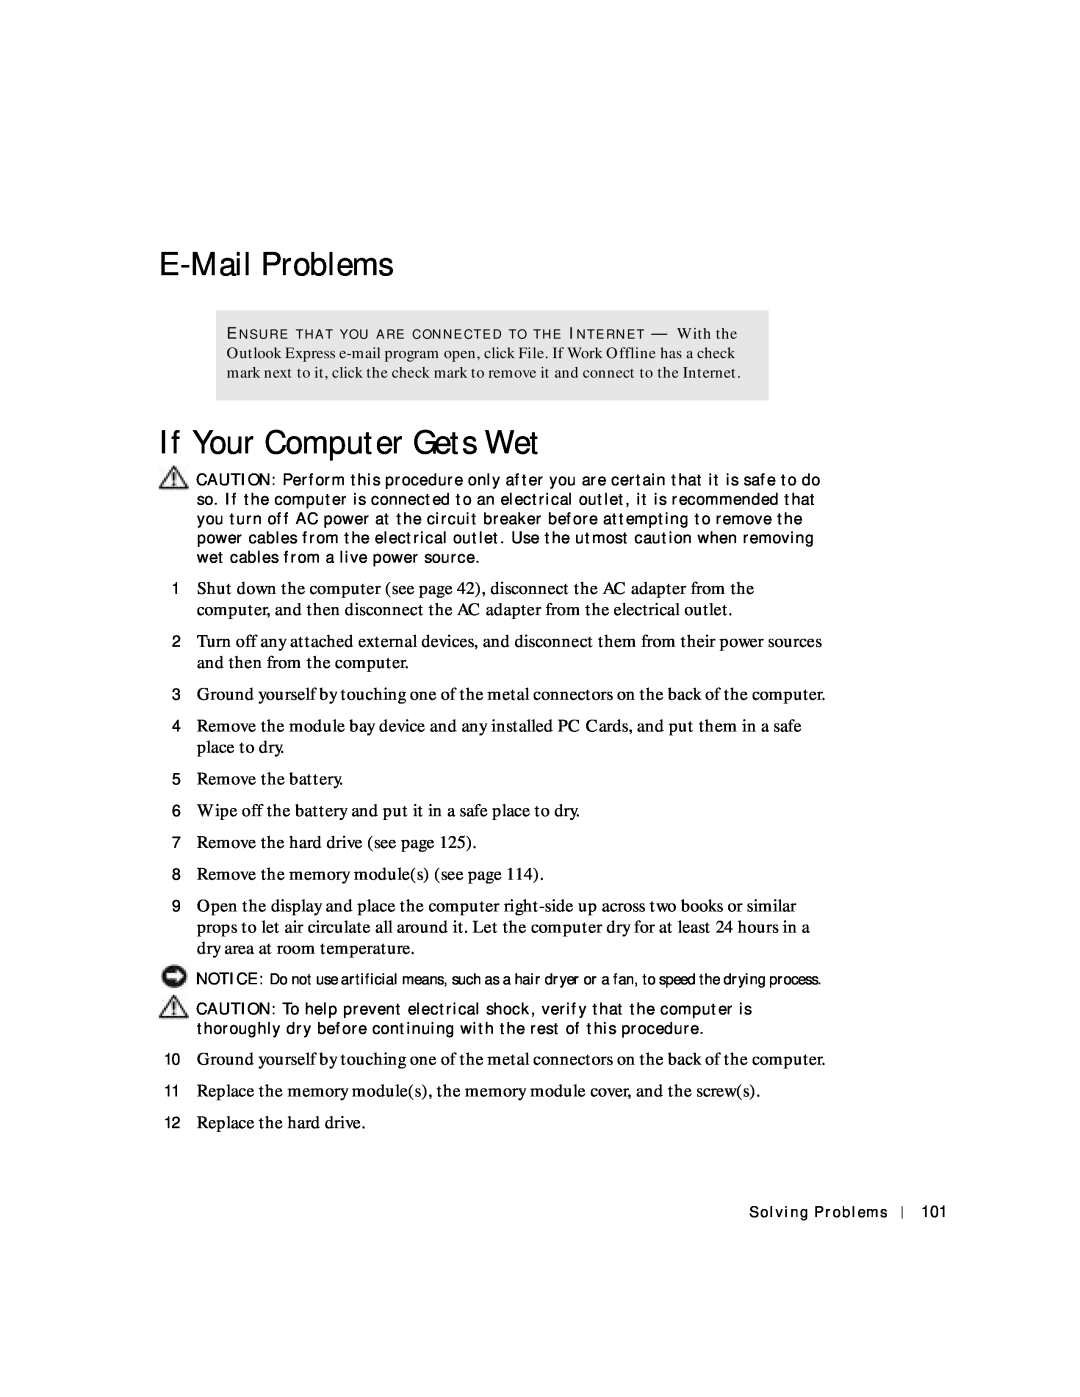 Dell 8600 manual E-Mail Problems, If Your Computer Gets Wet 